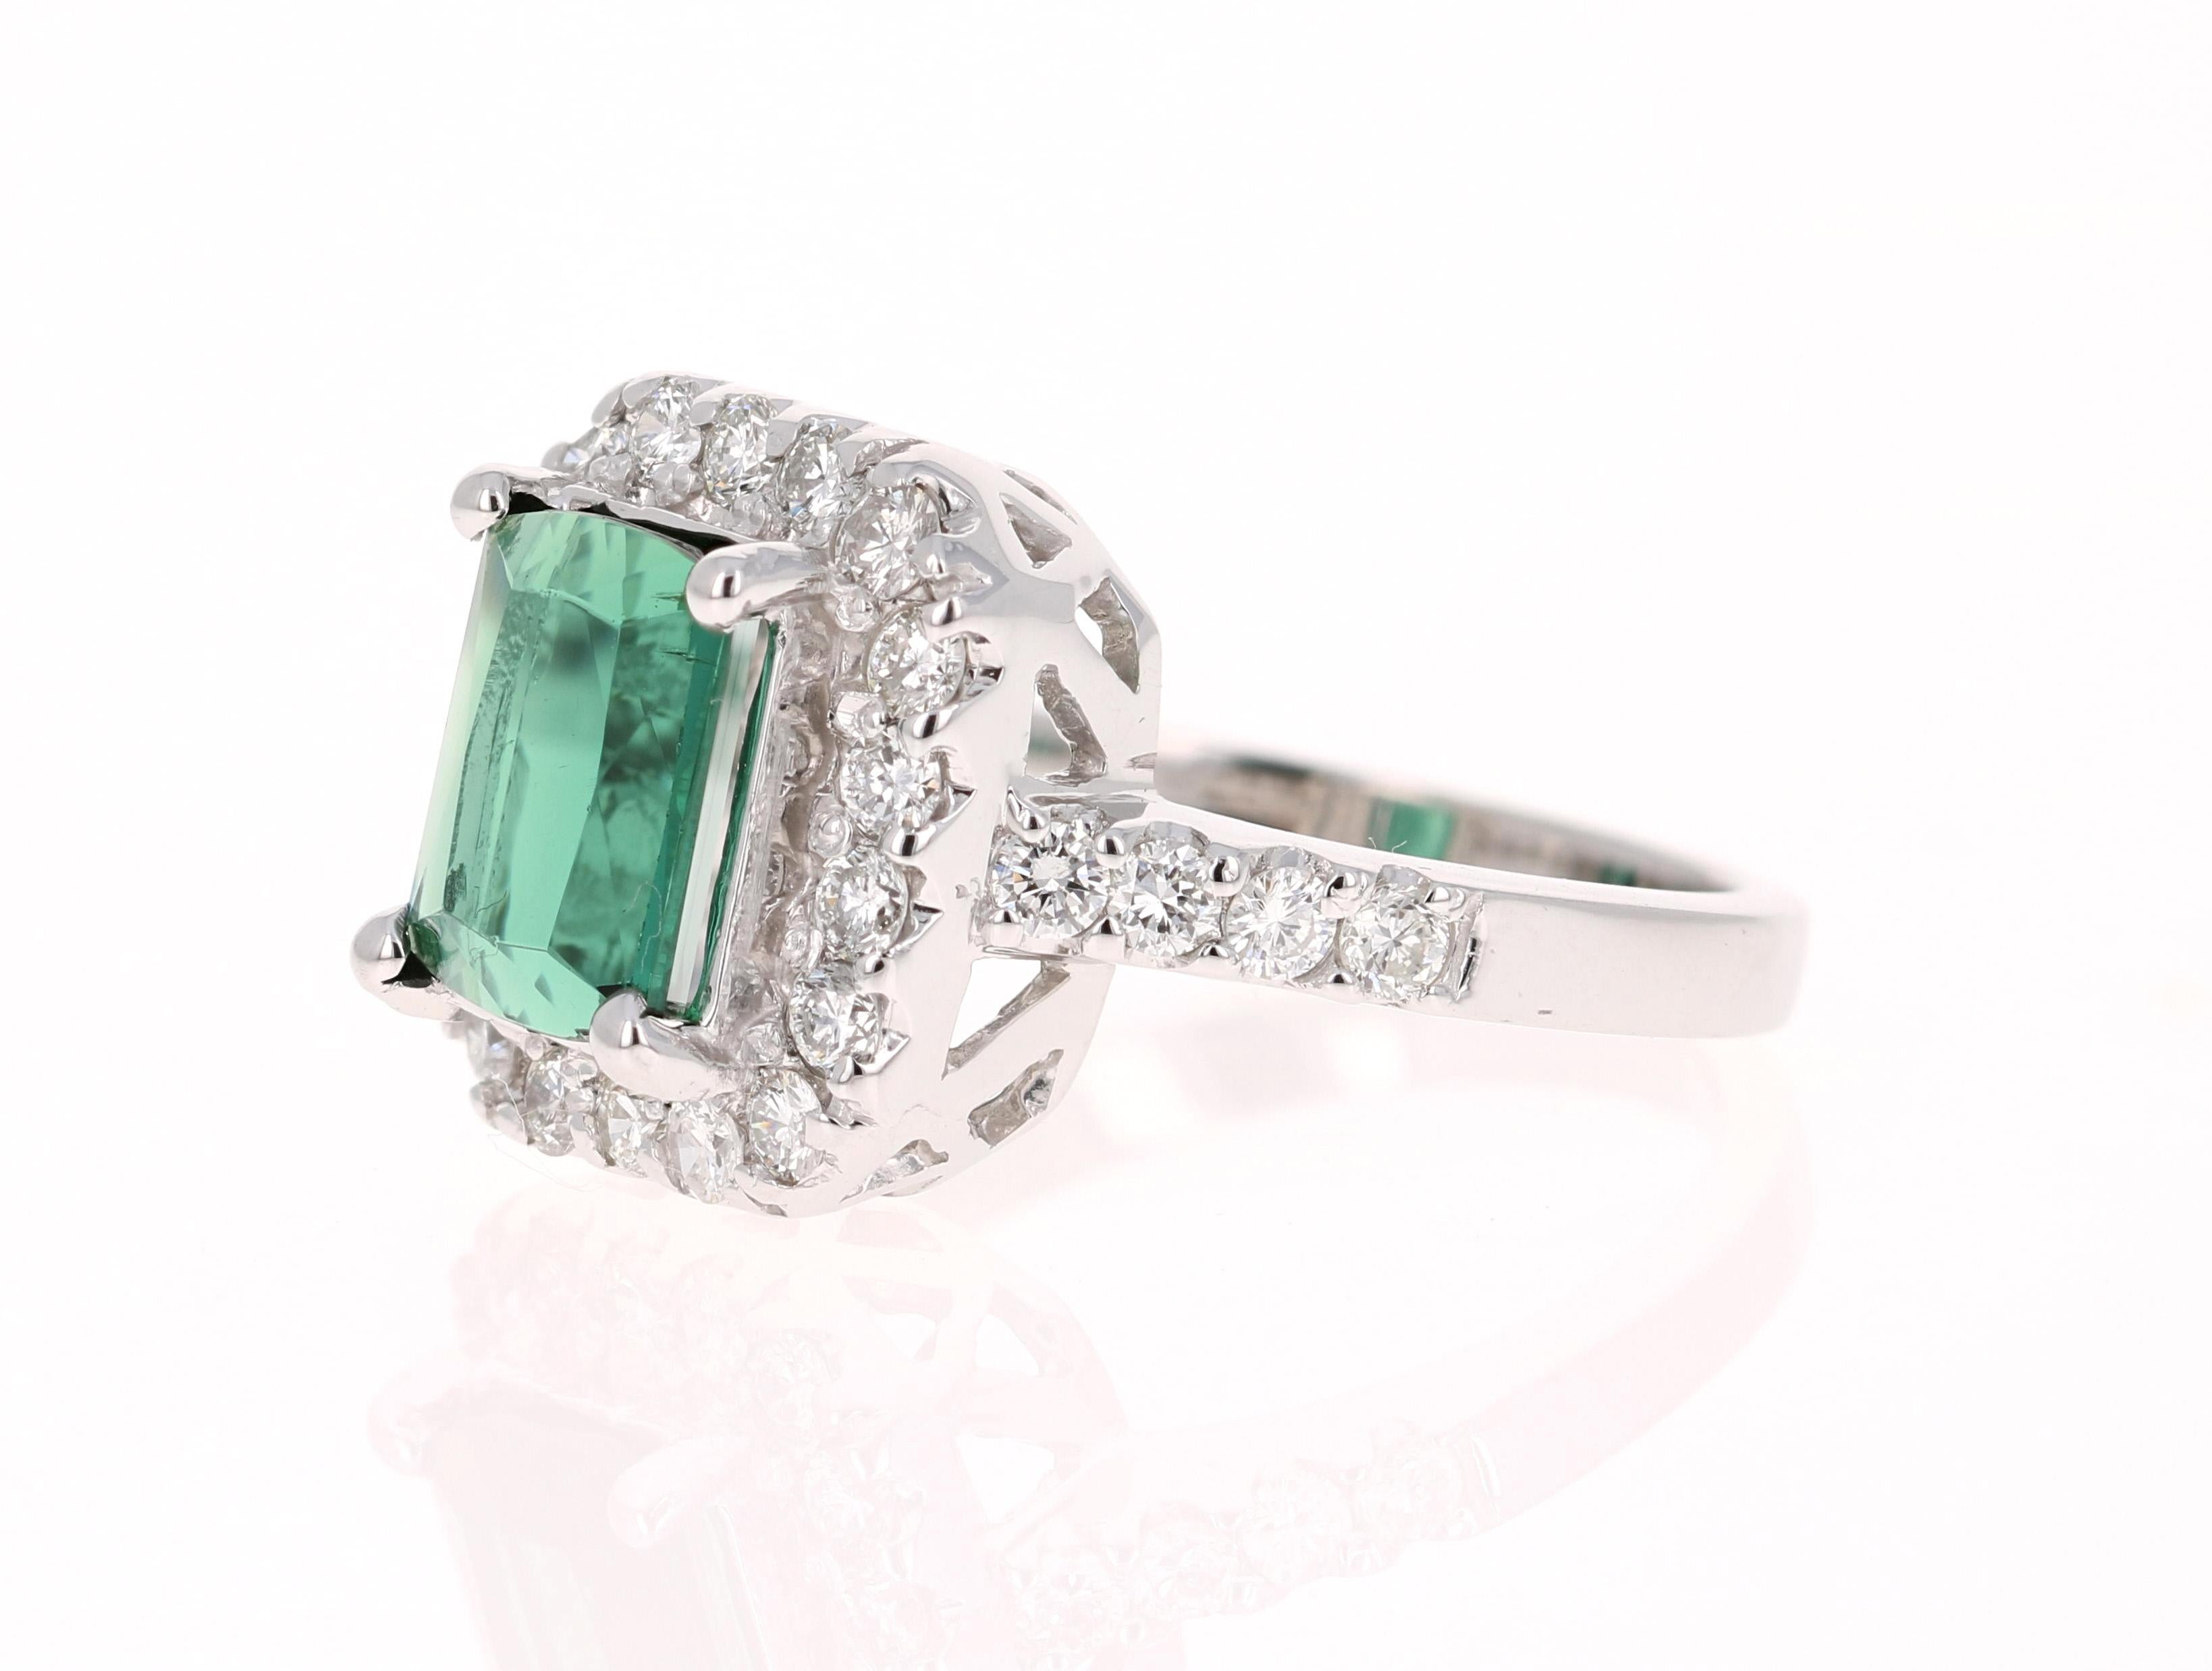 Contemporary 3.34 Carat Green Tourmaline Diamond White Gold Engagement Ring For Sale